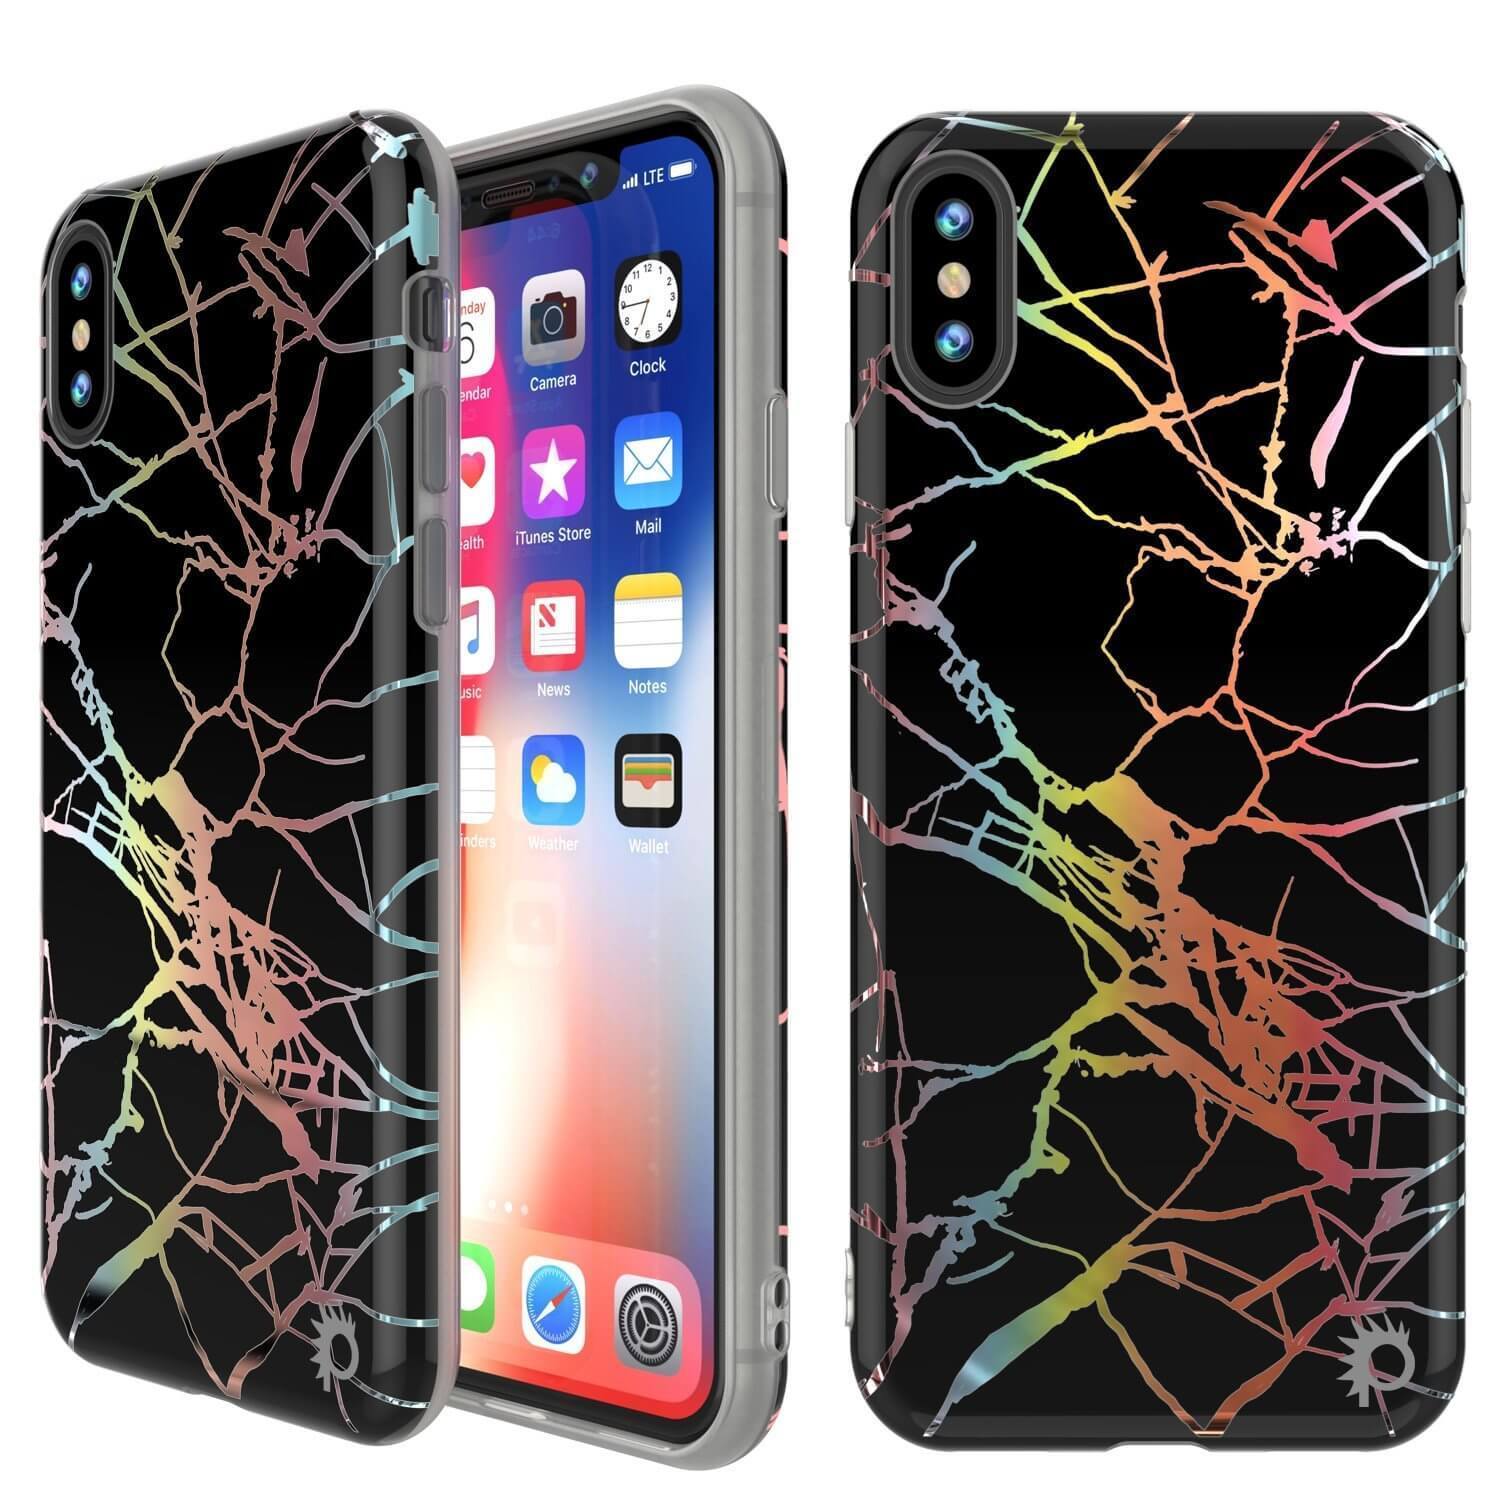 Punkcase iPhone XS Max Marble Case, Protective Full Body Cover W/9H Tempered Glass Screen Protector (Black Mirage)